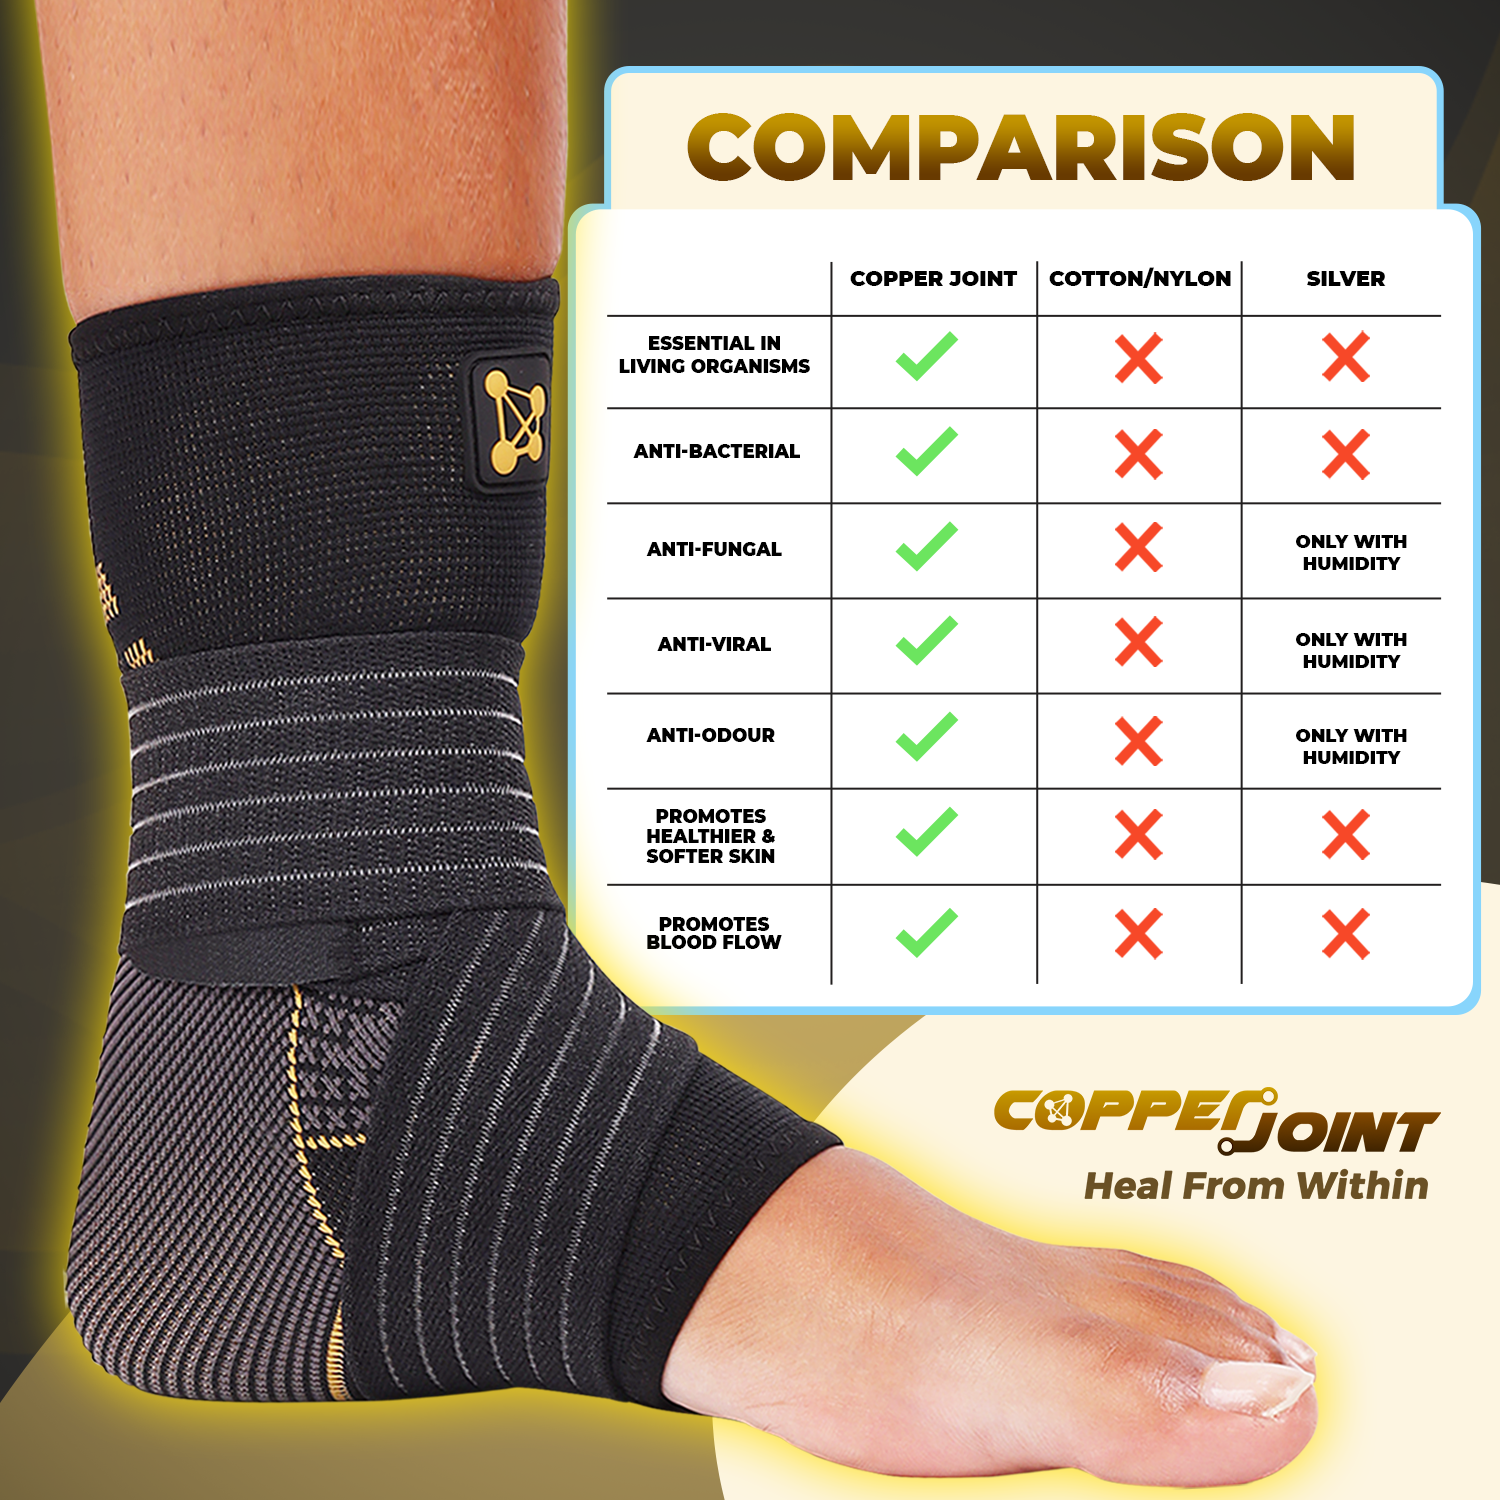 CopperJoint Compression Ankle Brace Helping Women Table Tennis Athletes 